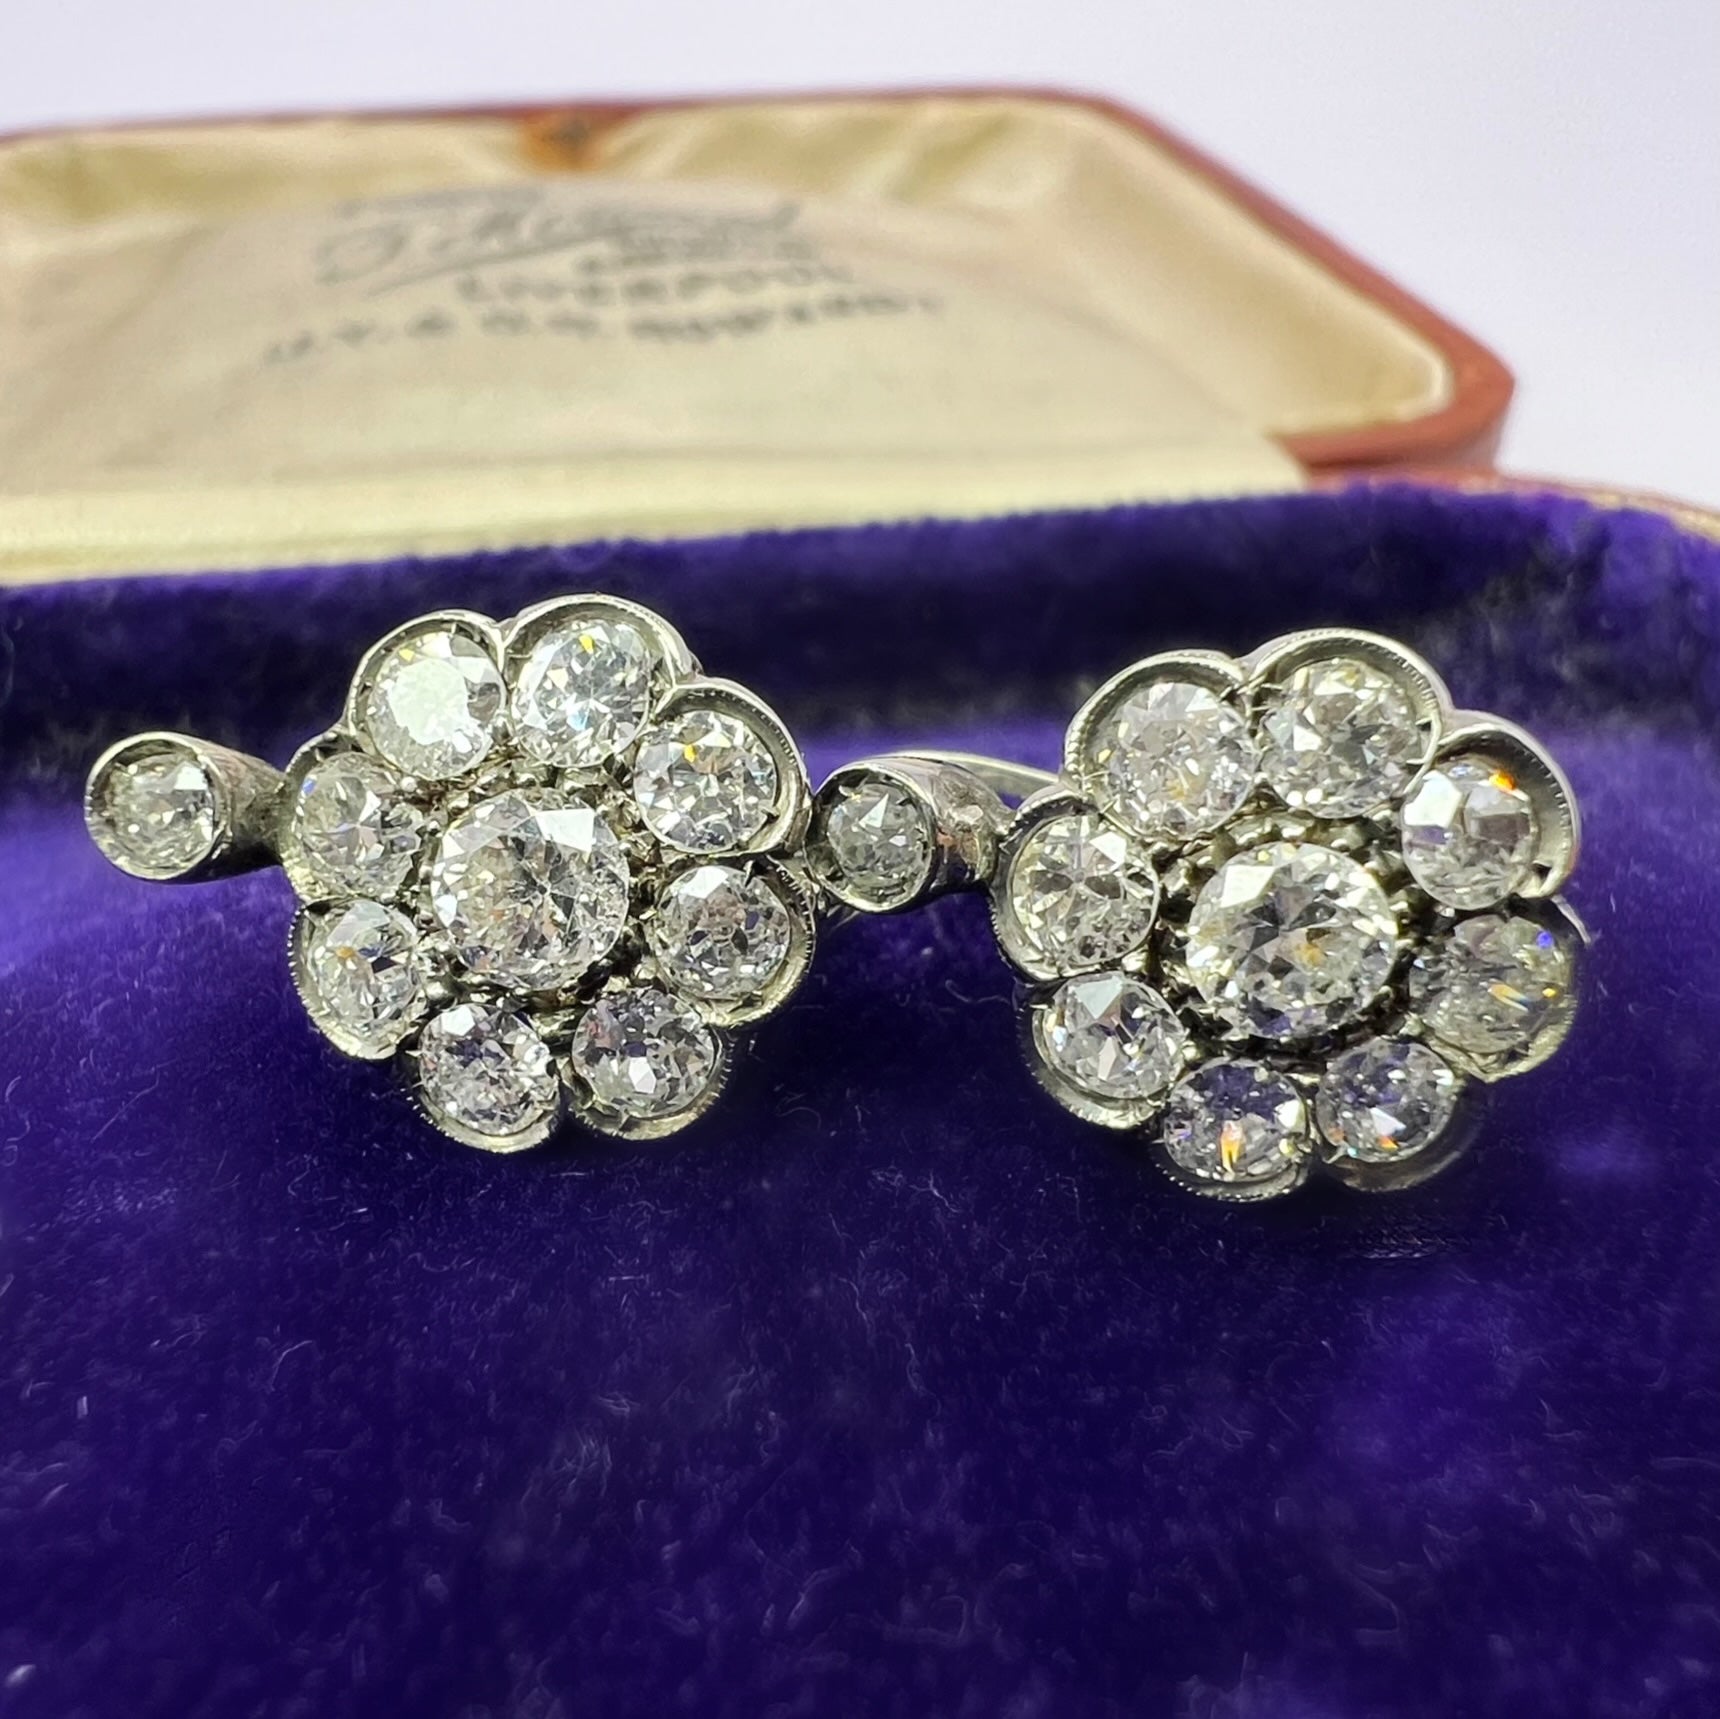 Antique Victorian 2.10ct Diamond Cluster Earrings